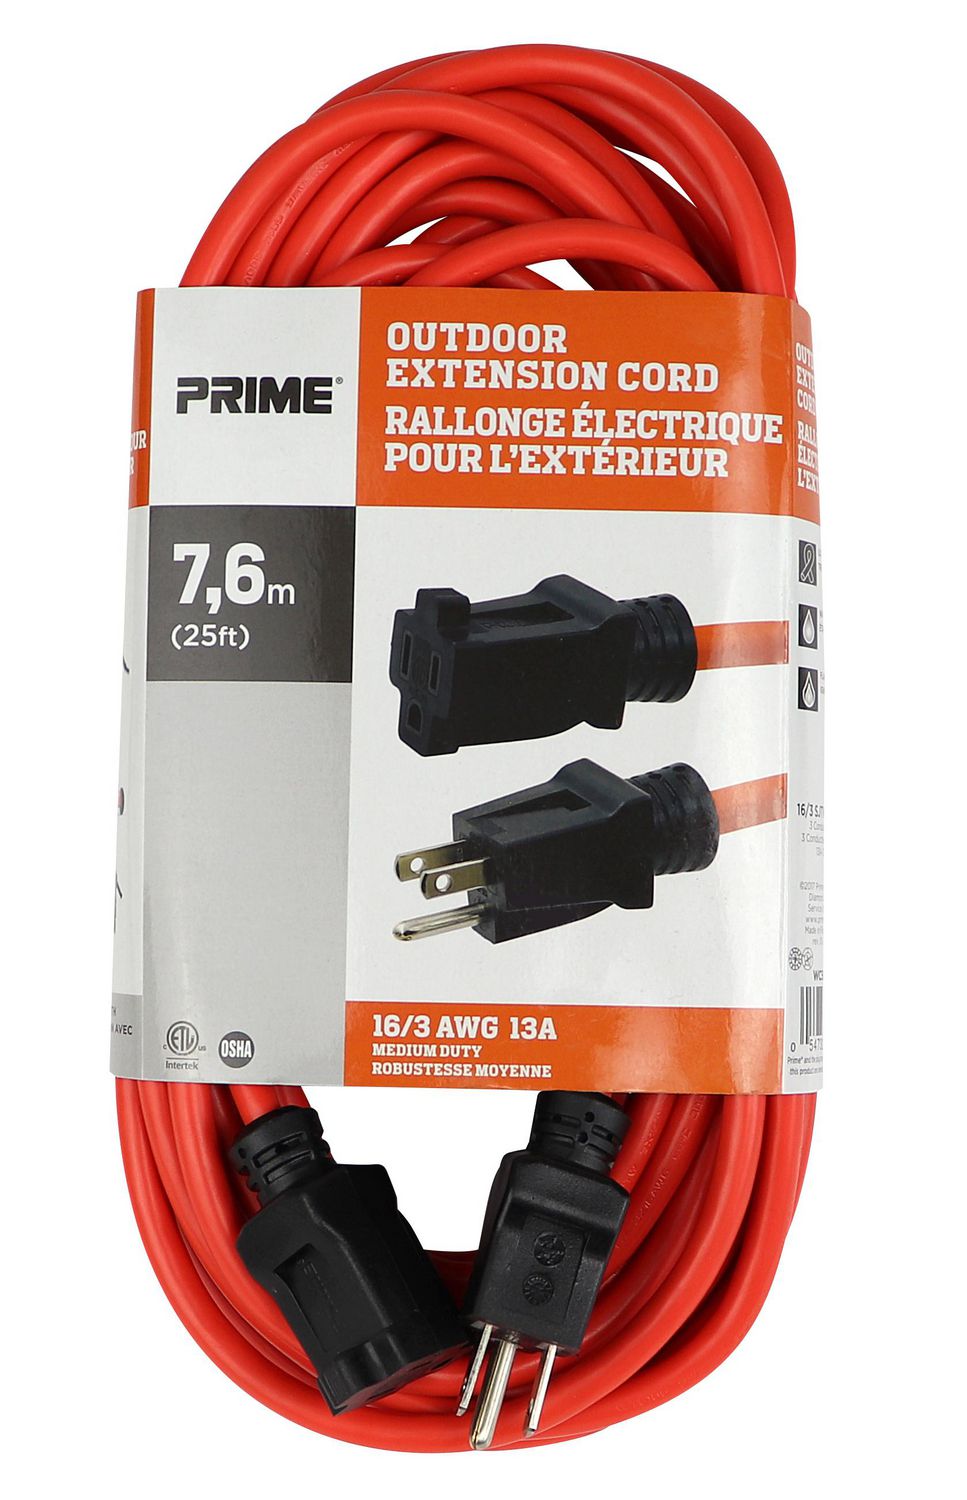 Prime Wire  Cable 7,6m (25ft) 16/3 AWG 13A Outdoor Extension Cord, 7,6m  (25ft) 16/3 Ext. Cord